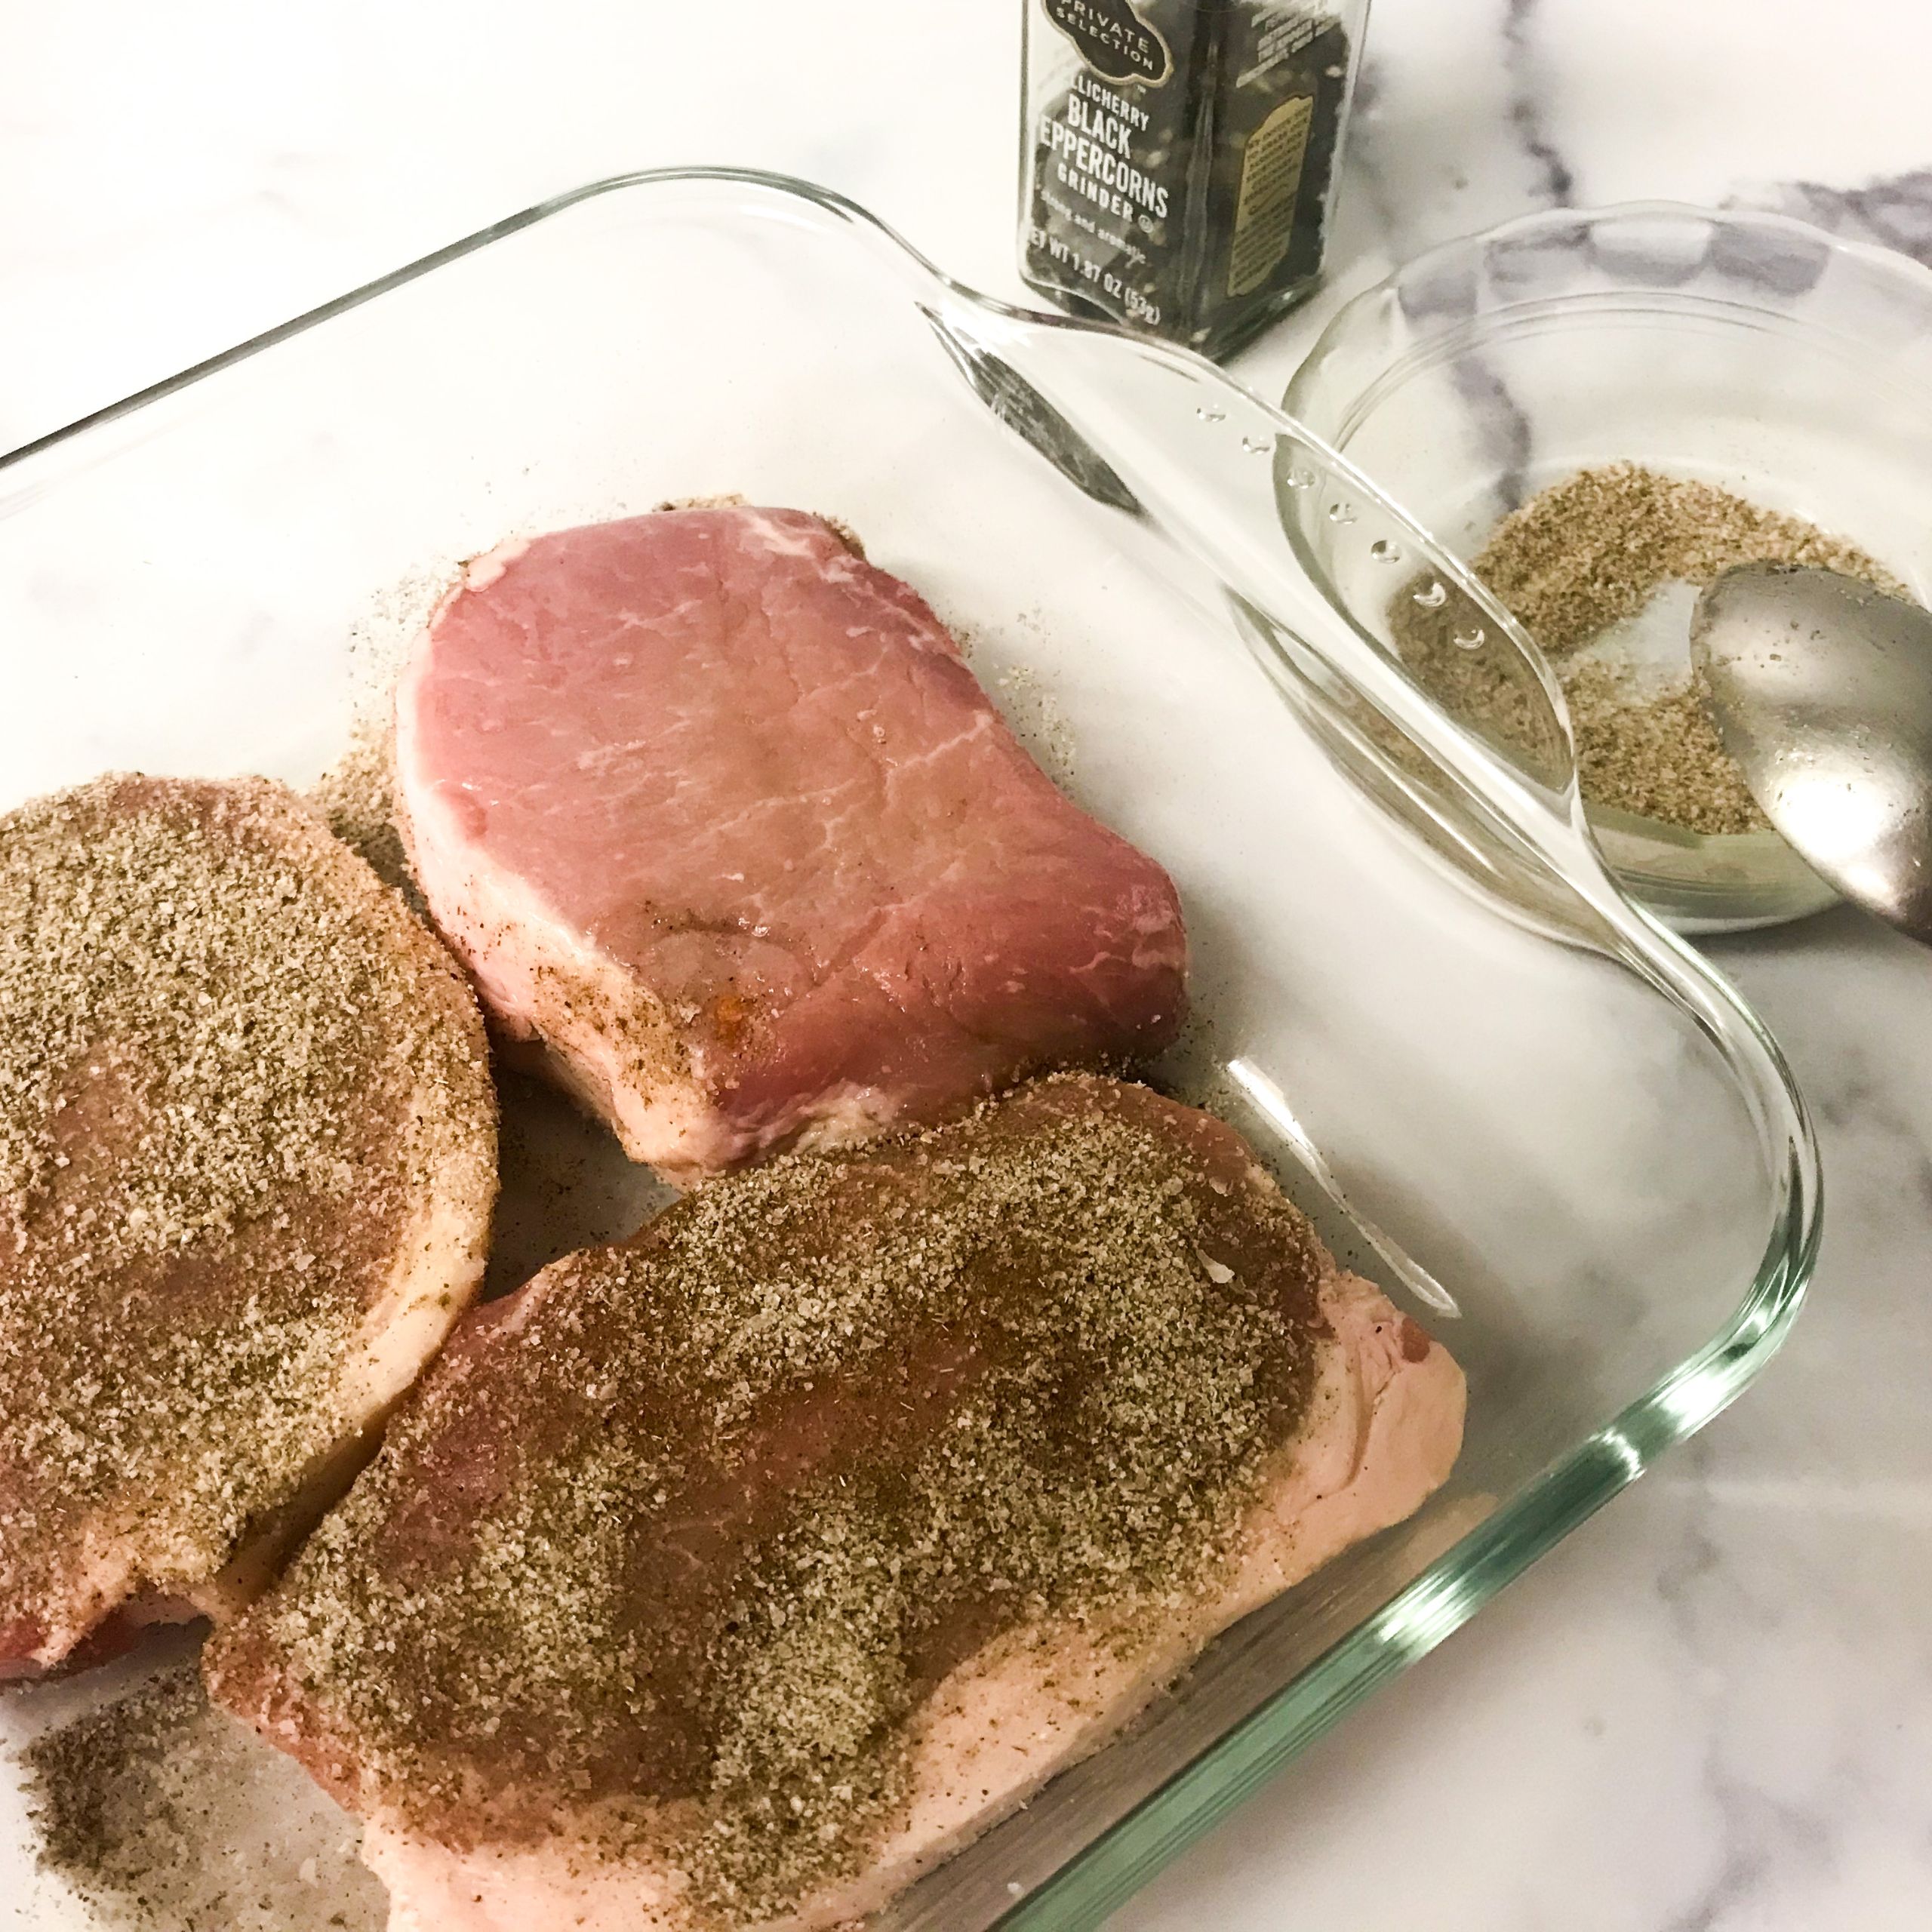 spices on pork chops | my curated tastes